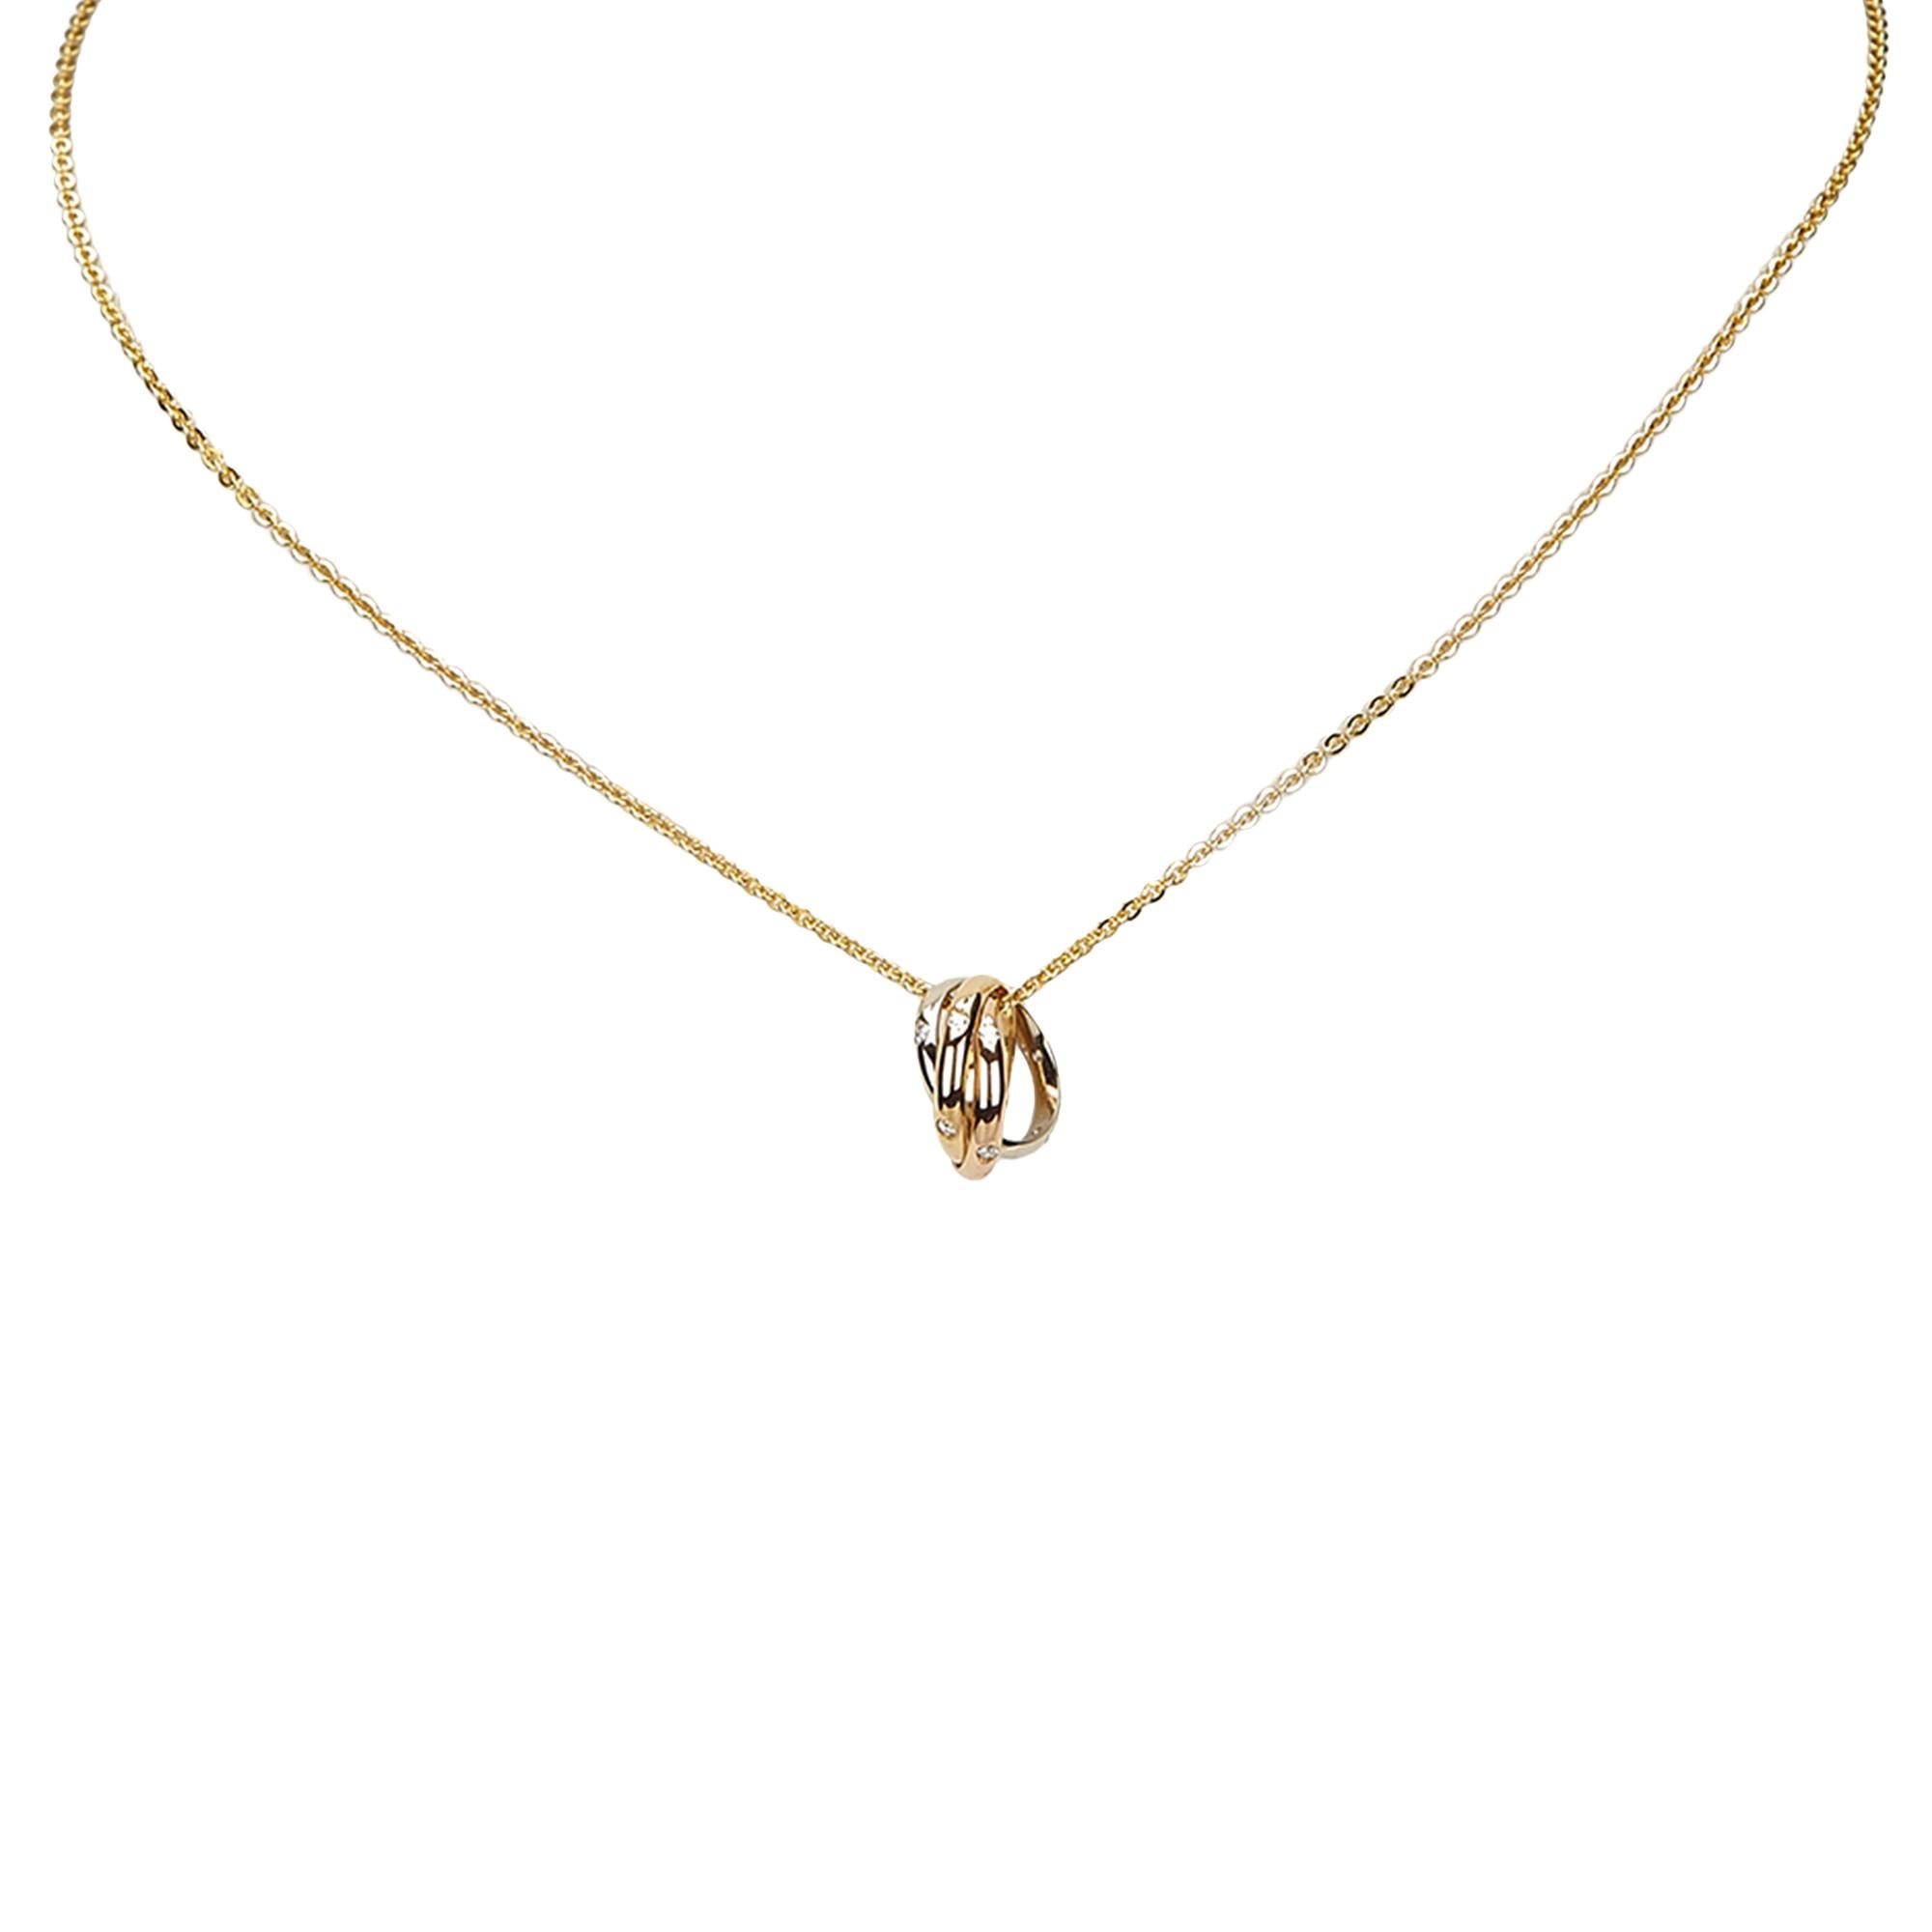 Cartier Trinity de 18k Tri-color Gold 15 Diamond Pendant Necklace.  Triple ring pendant set with 15 white diamonds in white gold, rose gold, and yellow gold.  Yellow gold chain necklace with lobster clasp. Kate Middleton is shown wearing the same